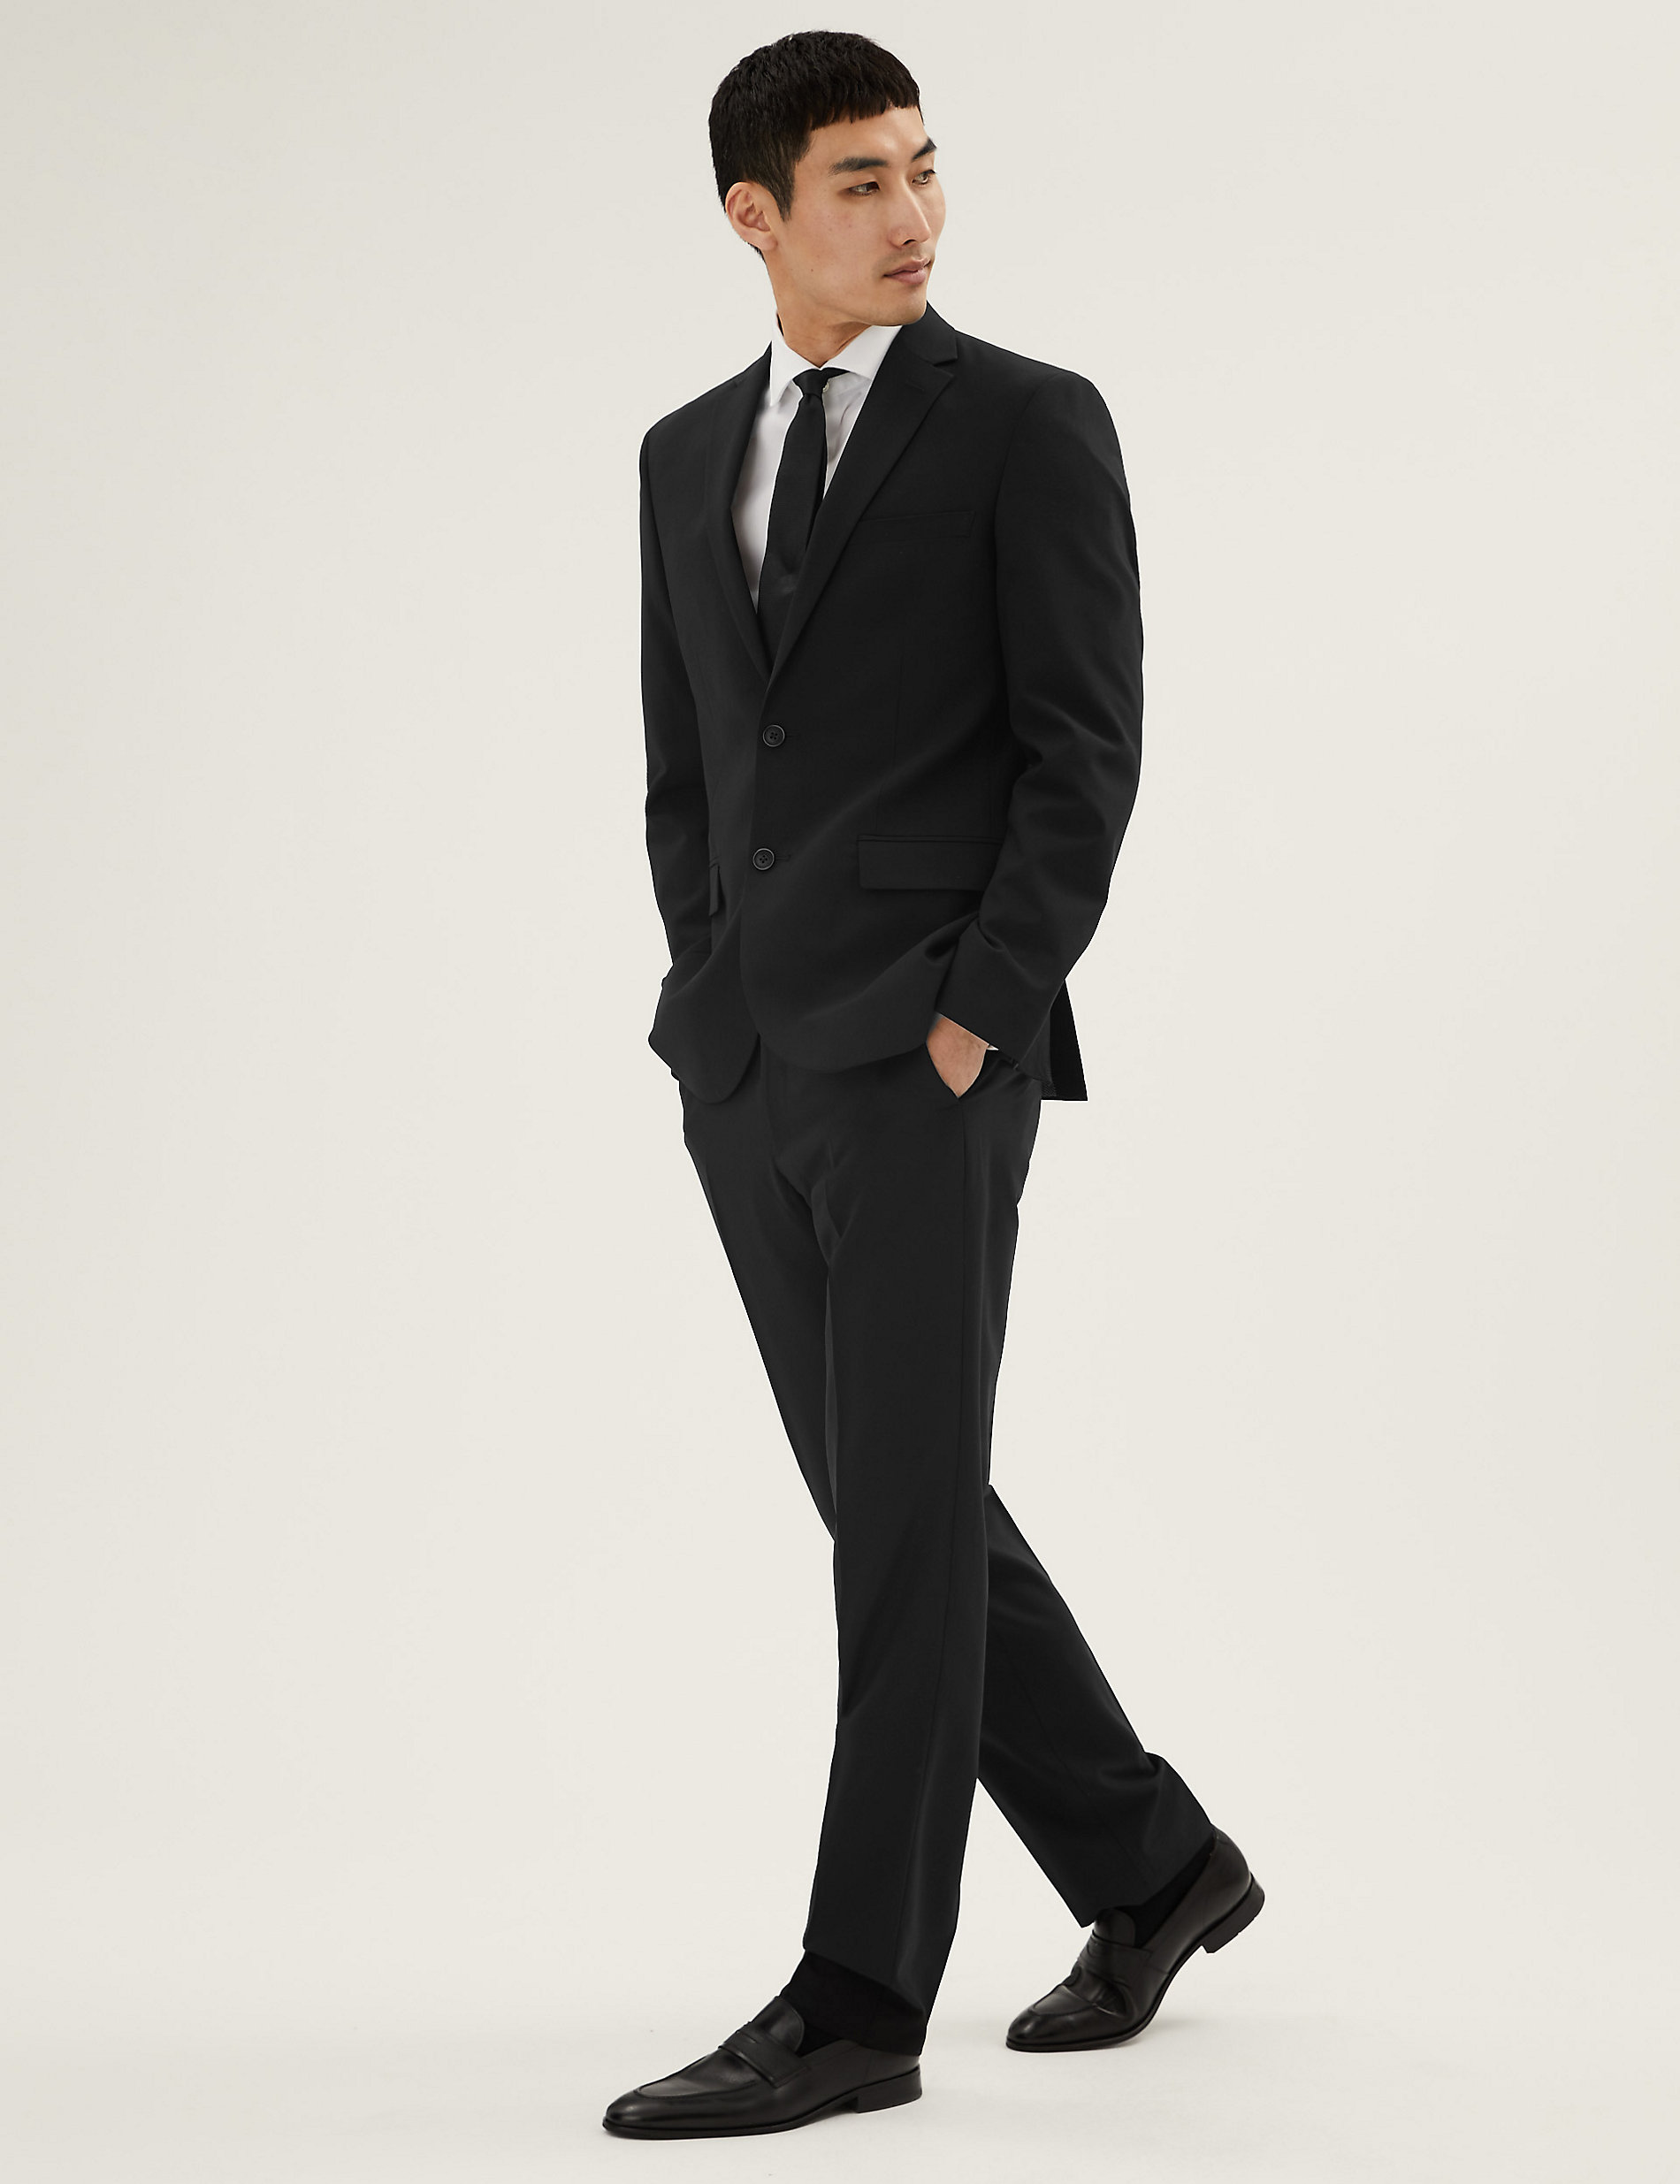 The Ultimate Black Tailored Fit Suit